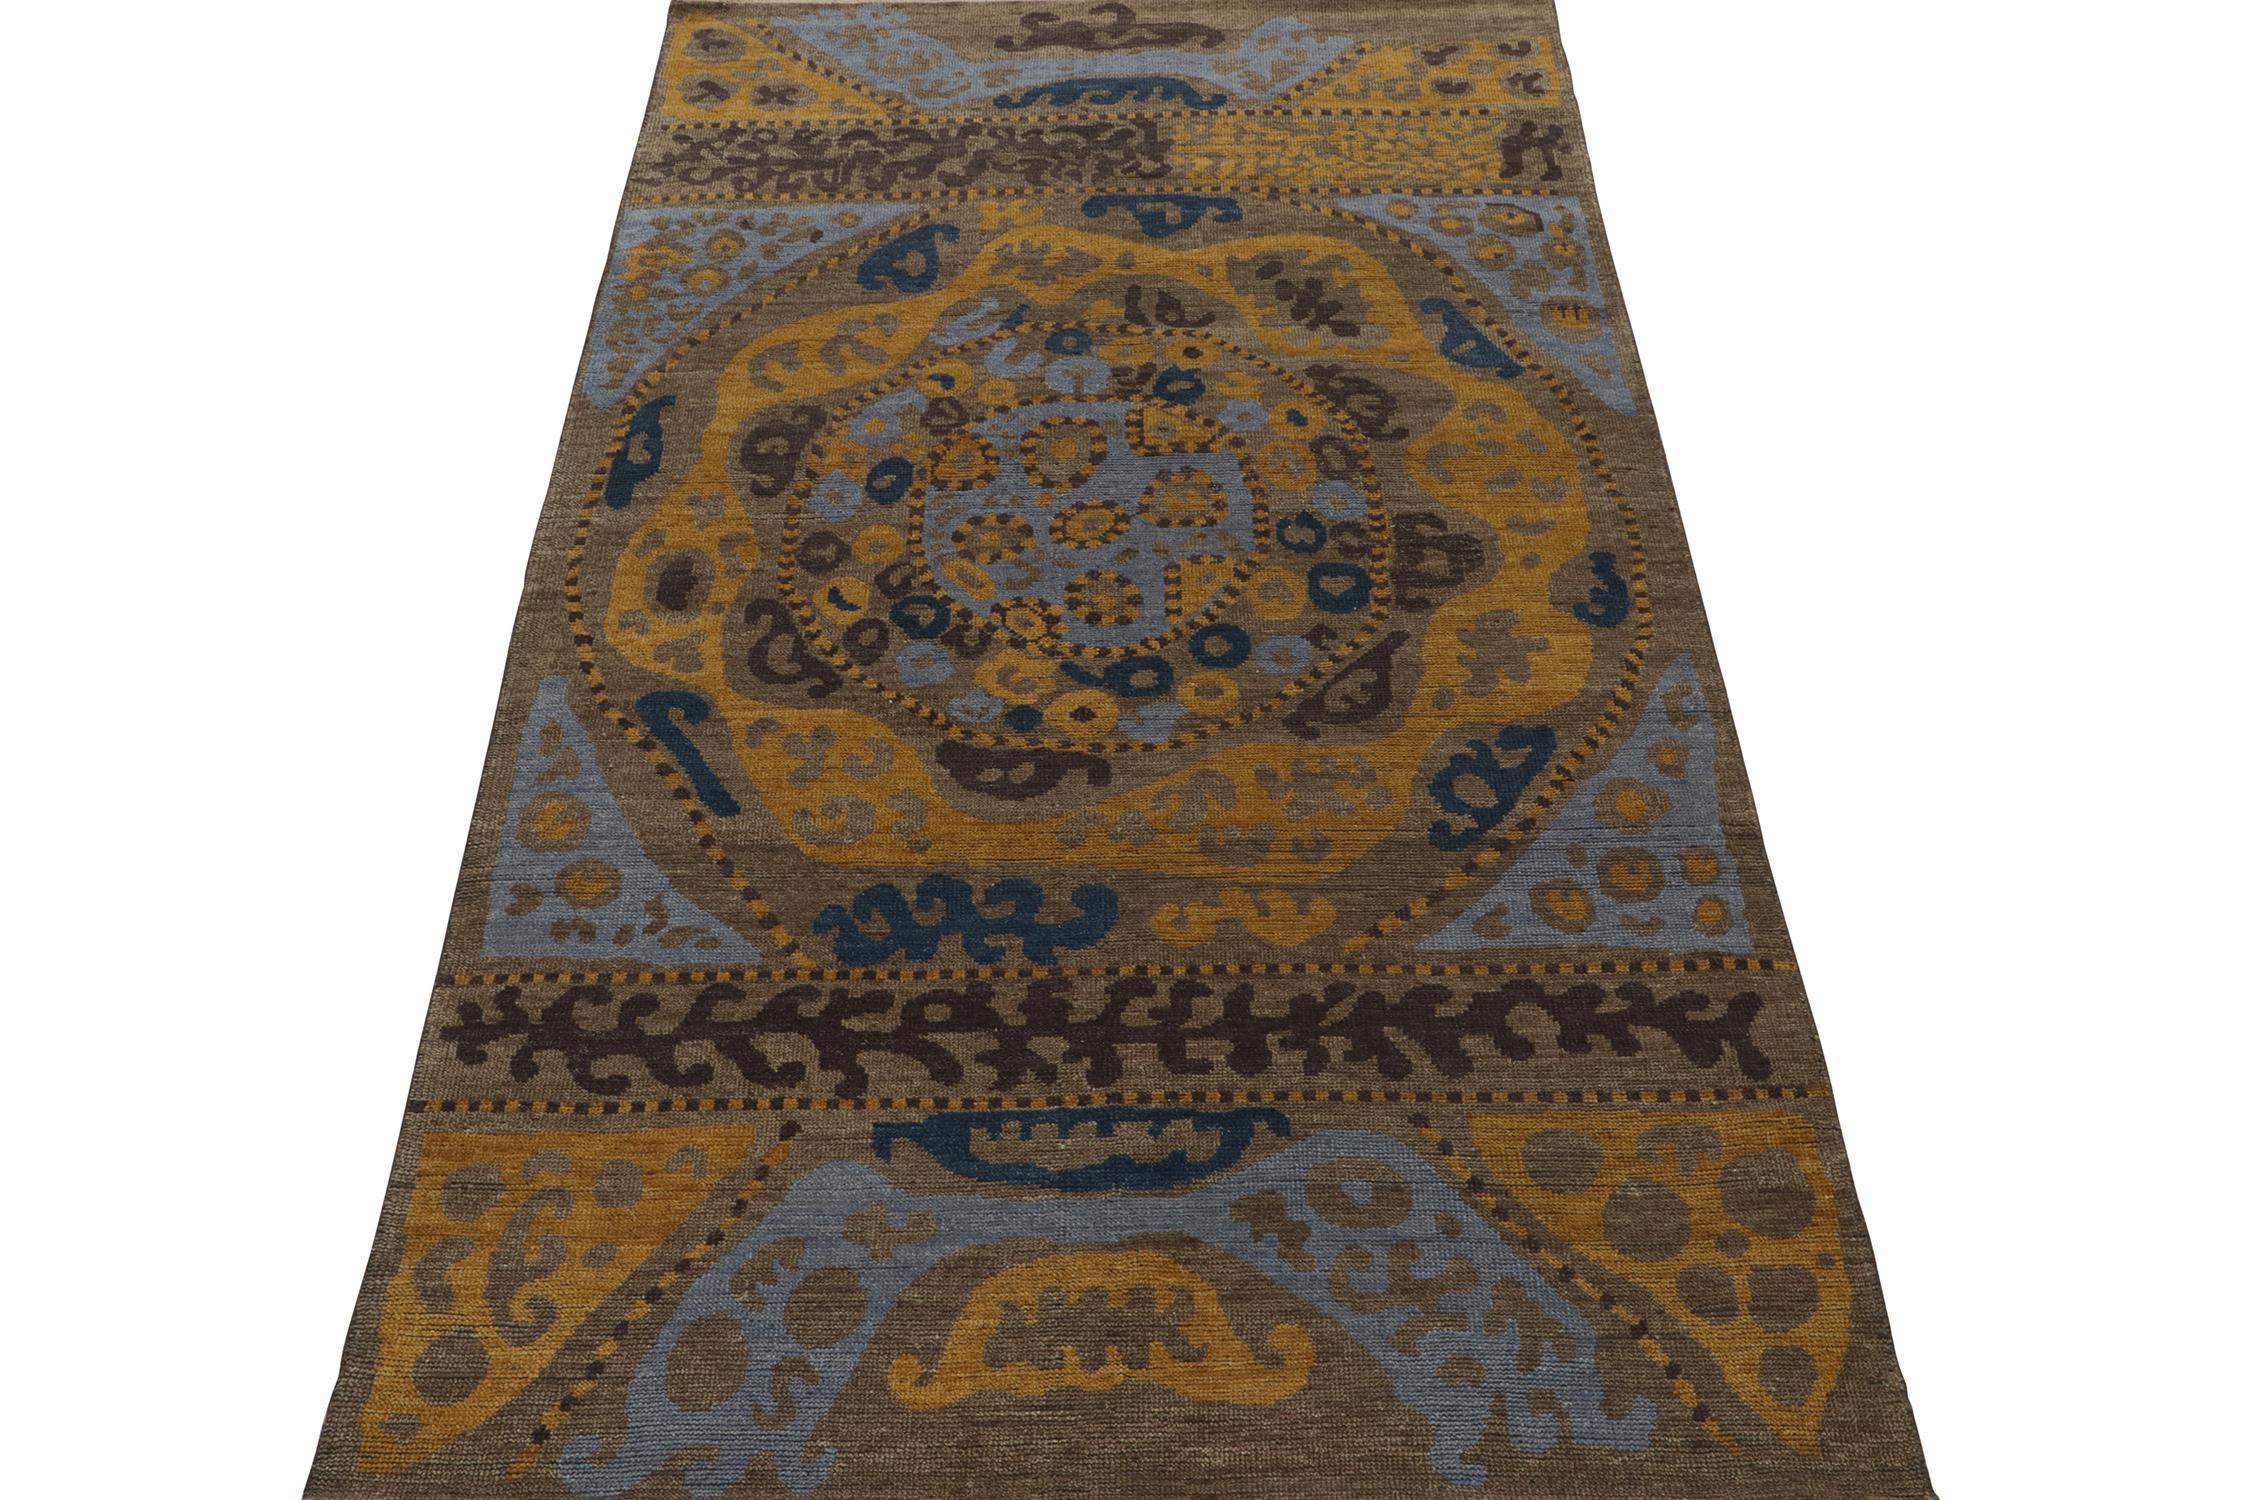 Indian Rug & Kilim’s Tribal Inspired Rug in Blue, Brown, Gold Geometric Patterns For Sale